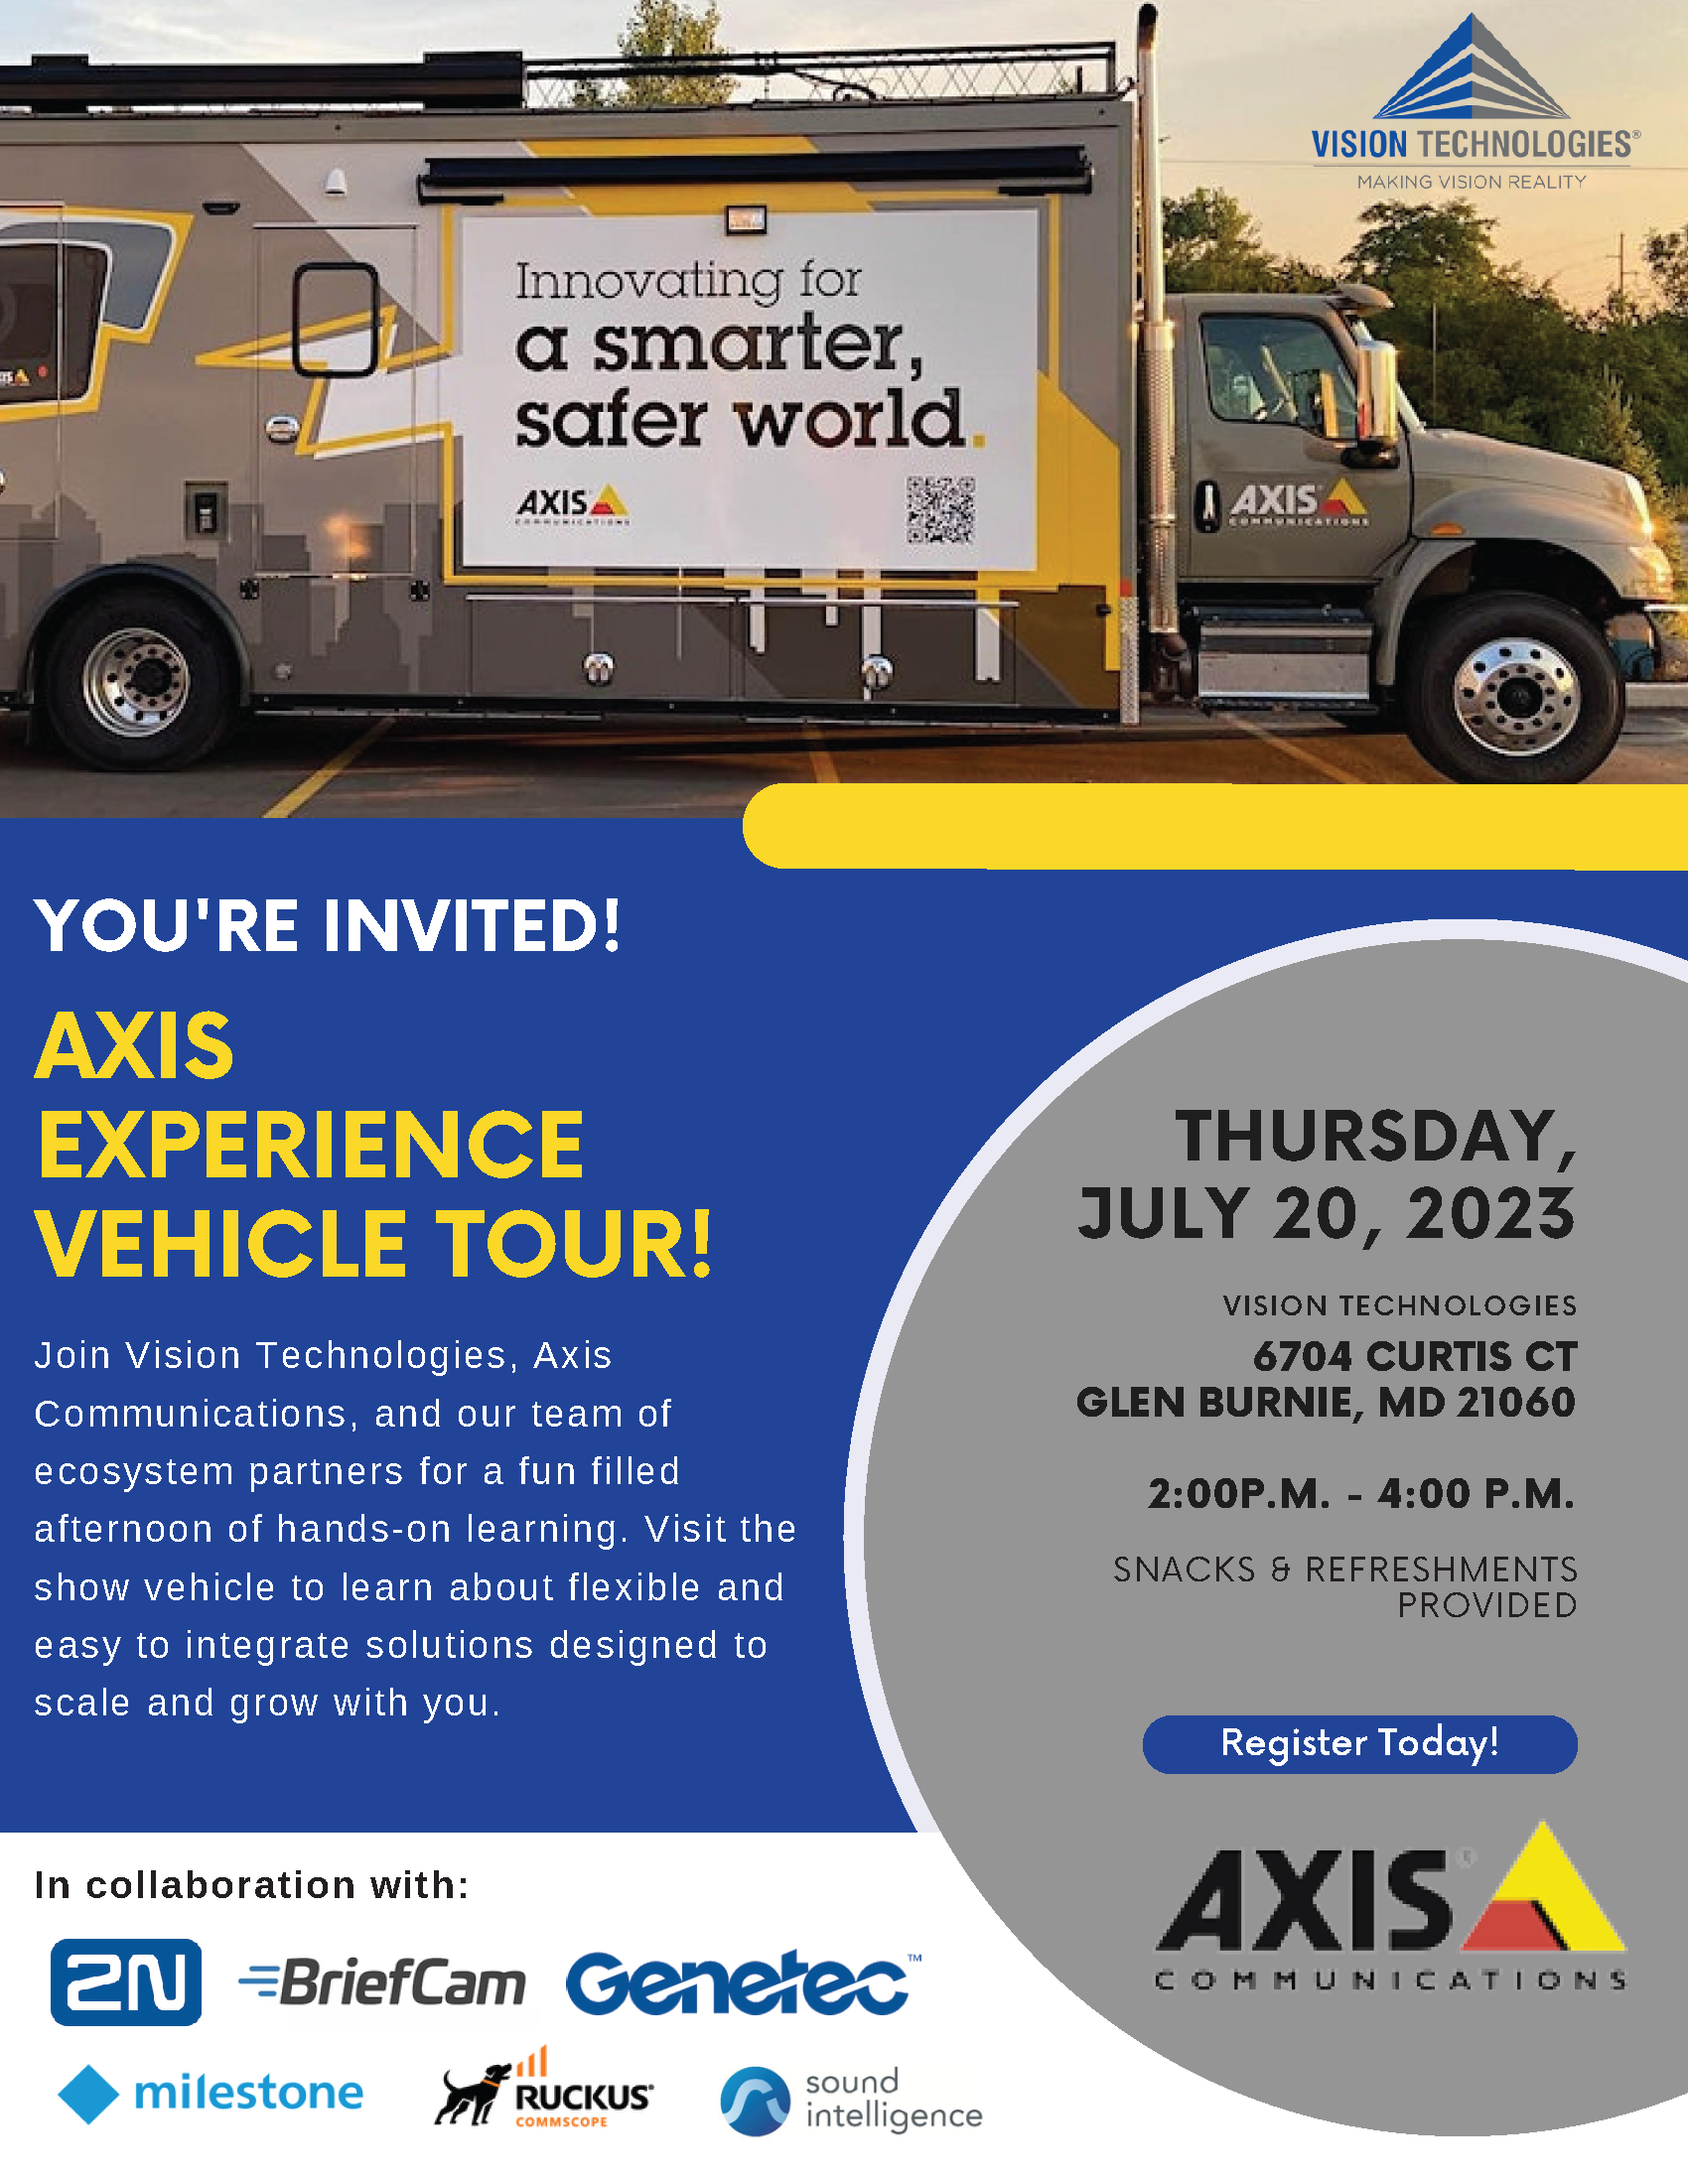 invitation to the Axis Experience Vehicle Tour at Vision Technologies